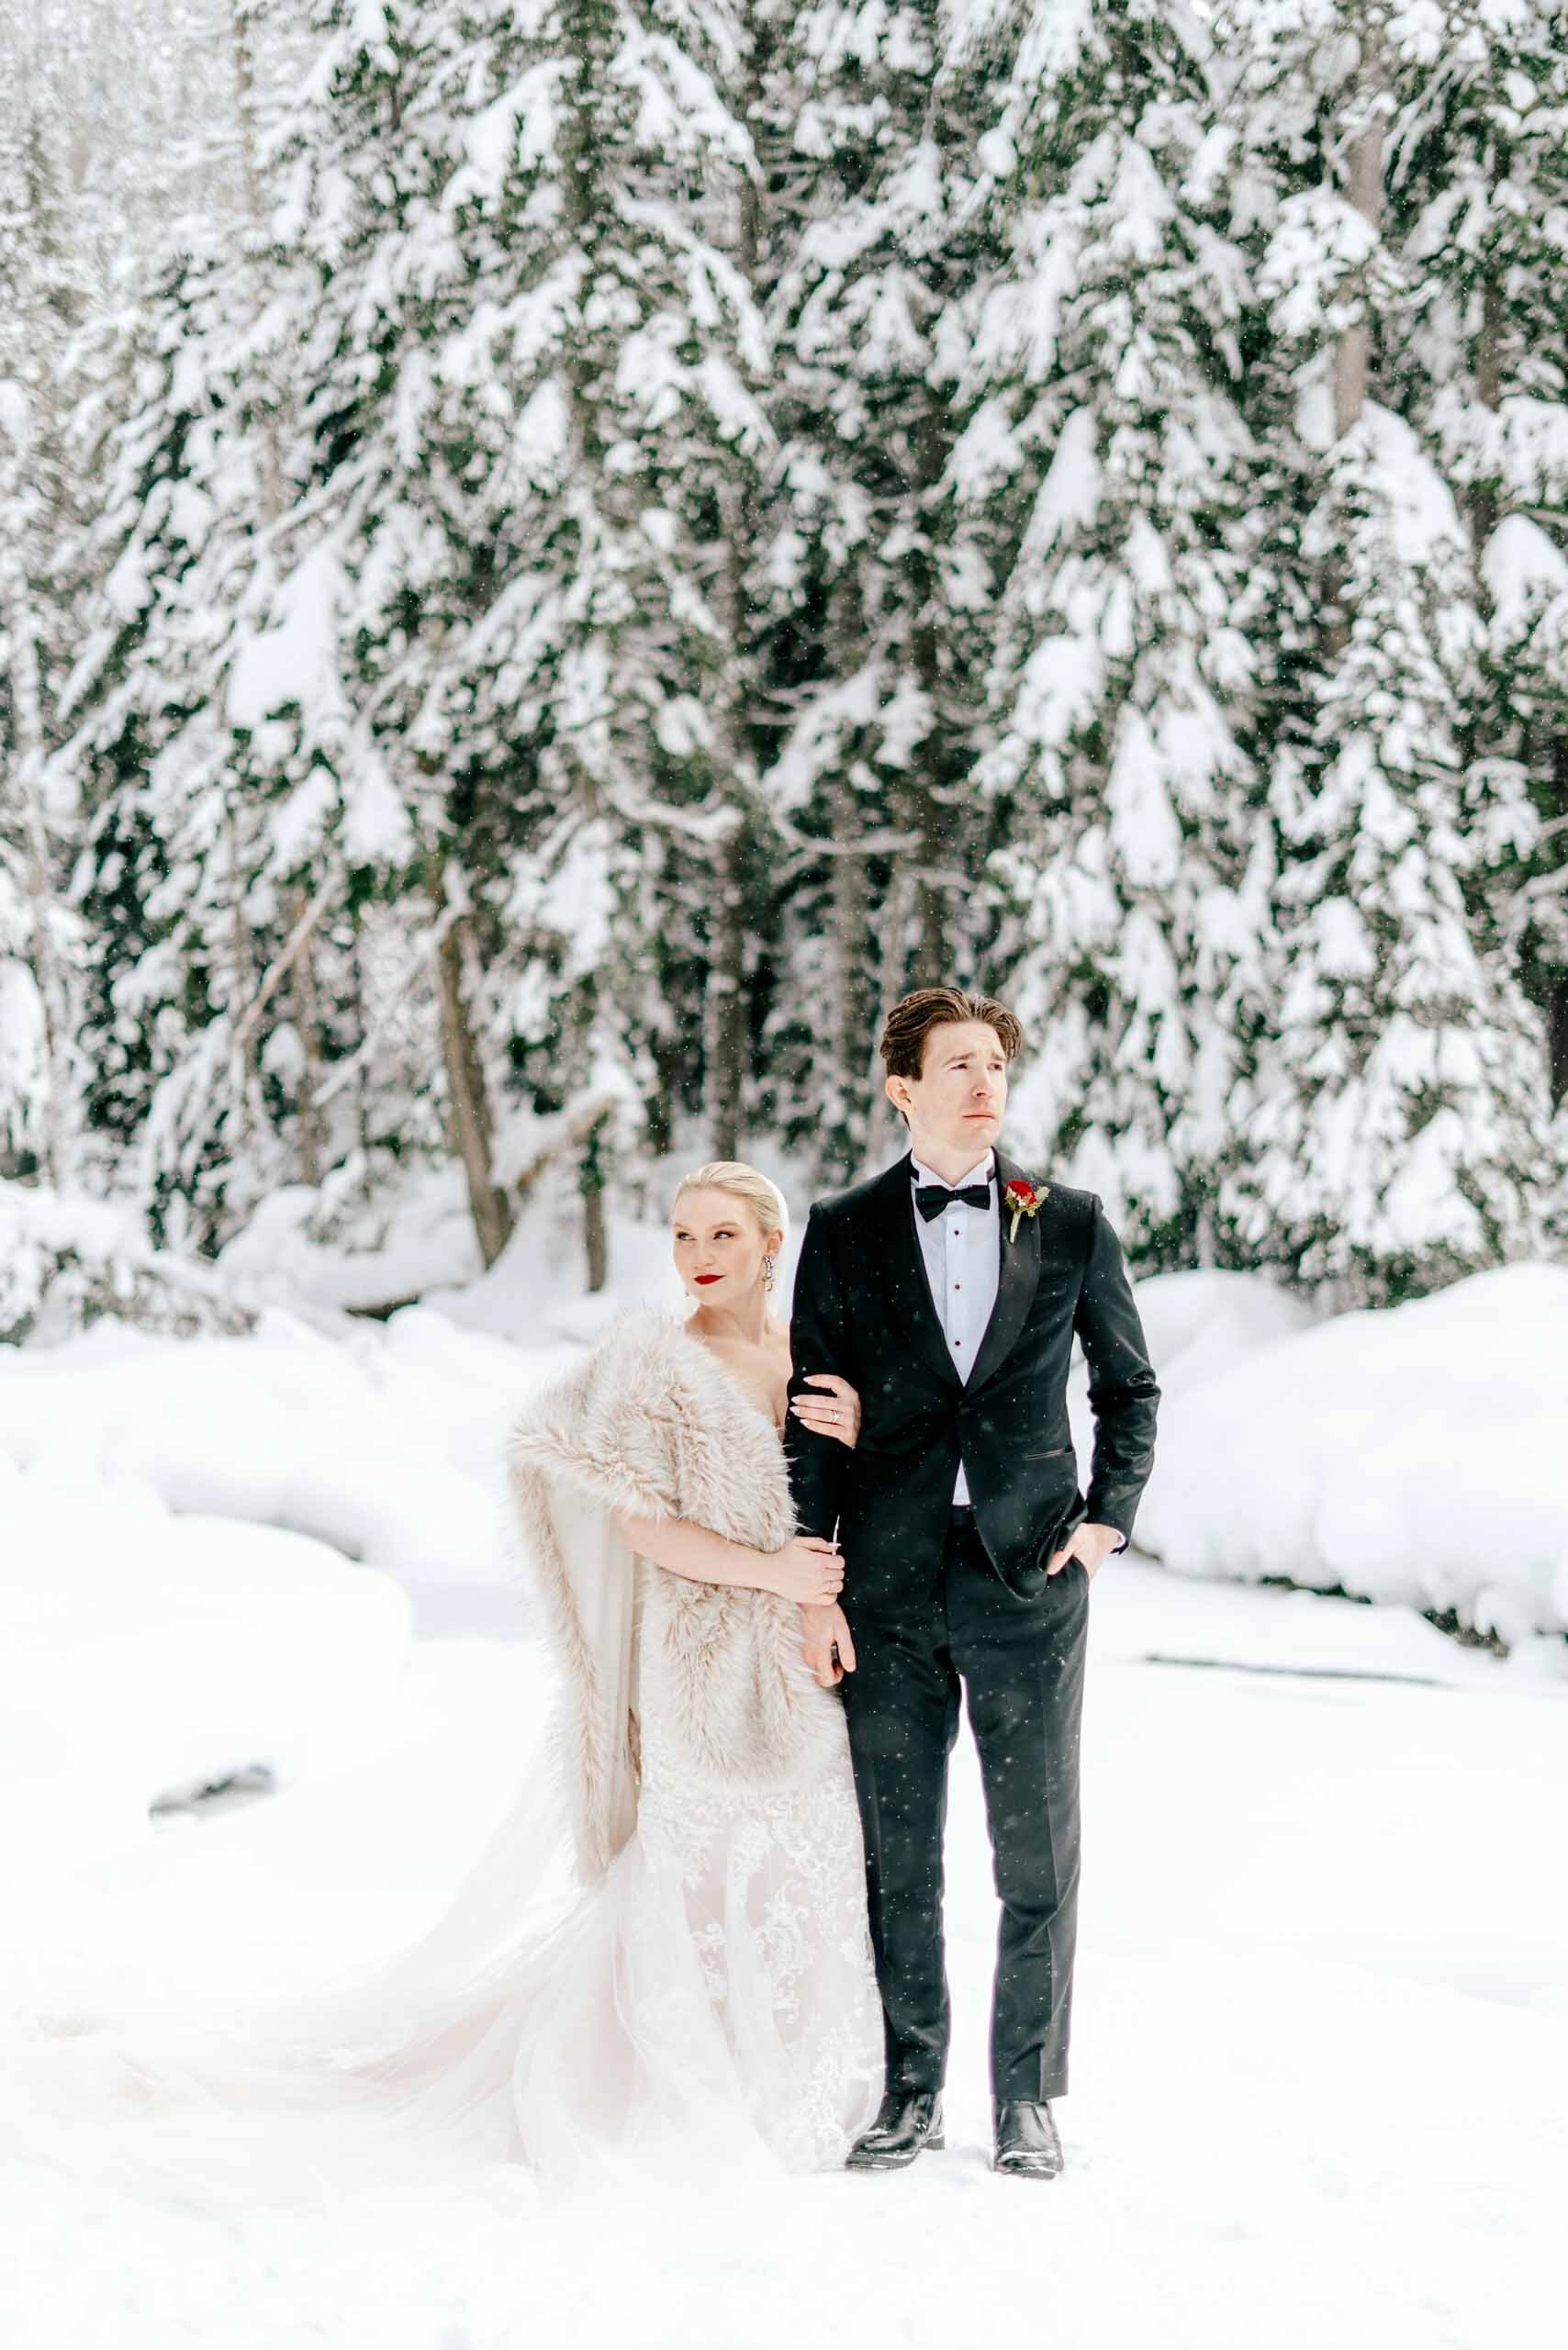 A bride in an elegant fur stole clutches her grooms arm as they stand in the snow and evergreen of Whistler, BC.